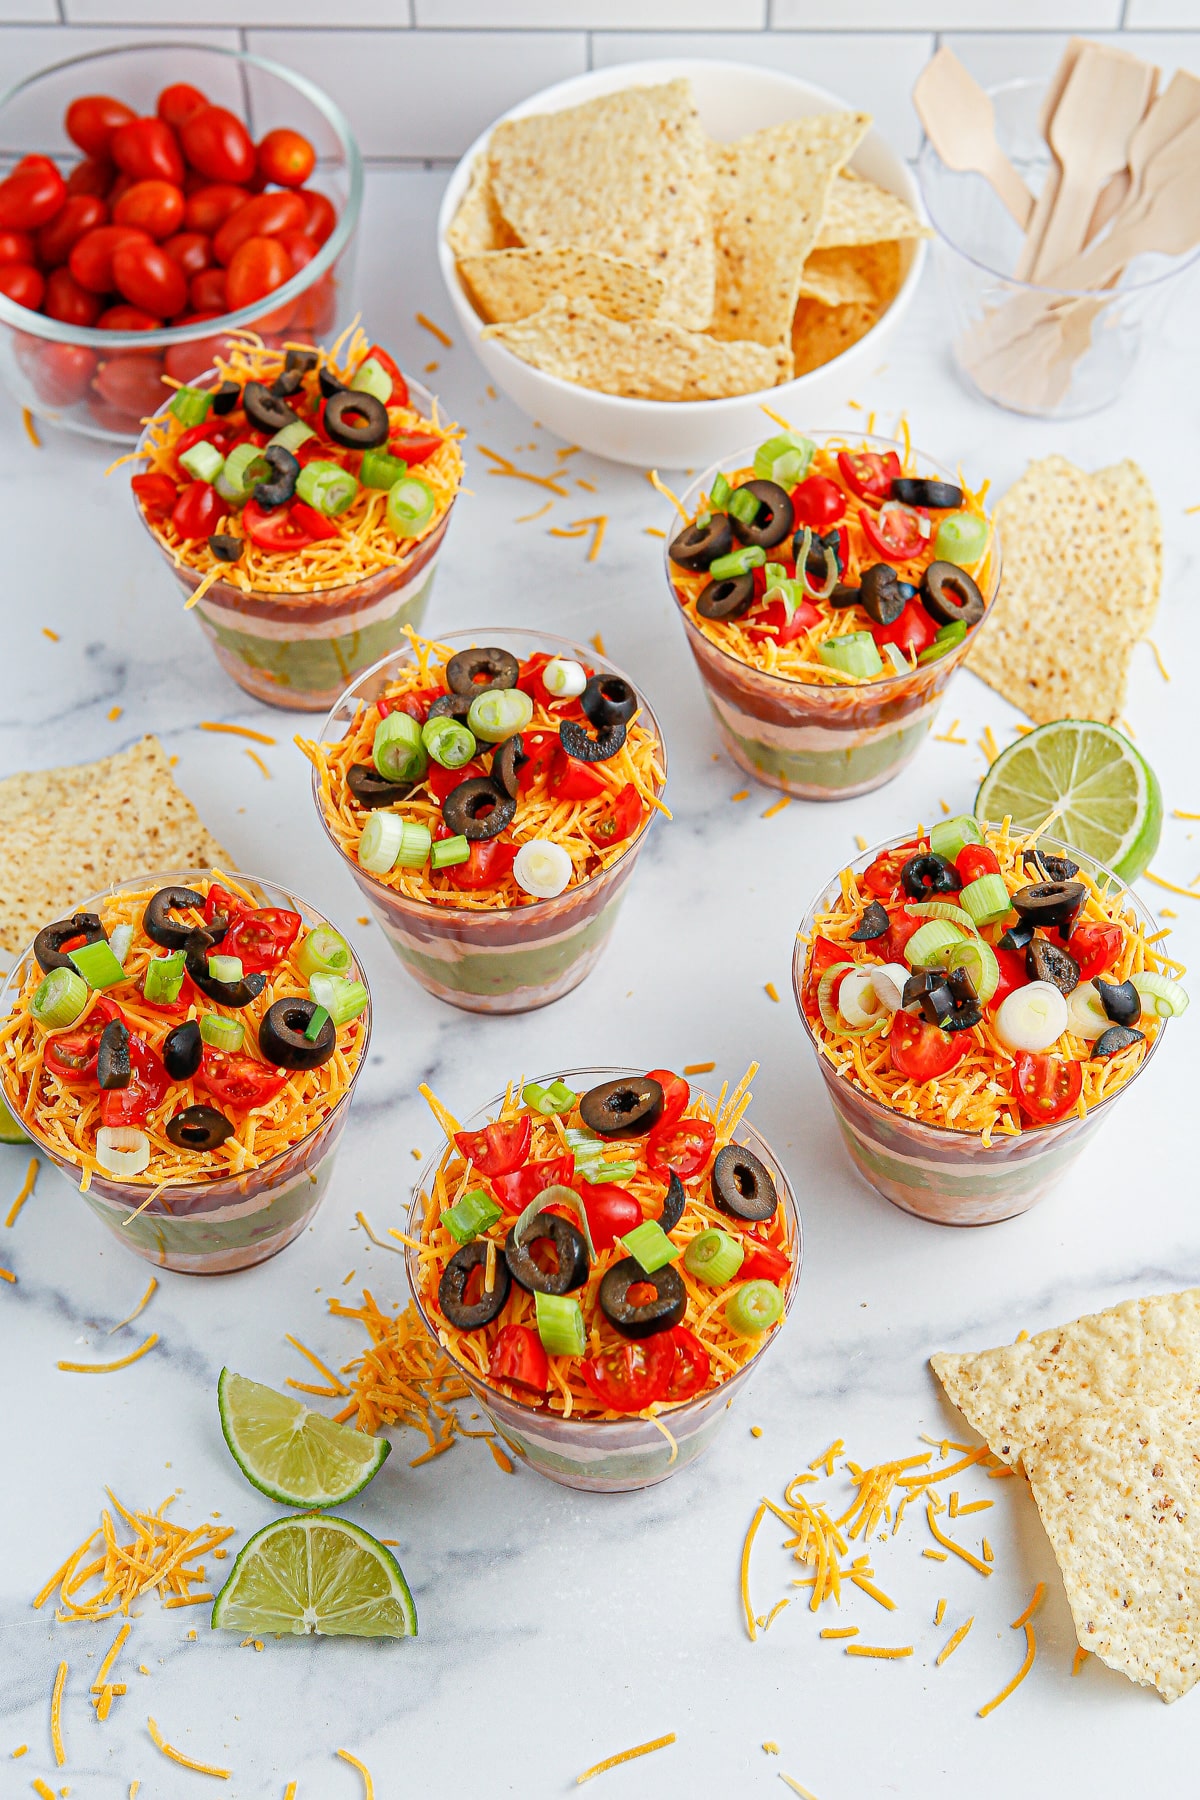 Six seven layer dip cups from overhead on a counter with more toppings, chips and lime slices nearby on the counter.